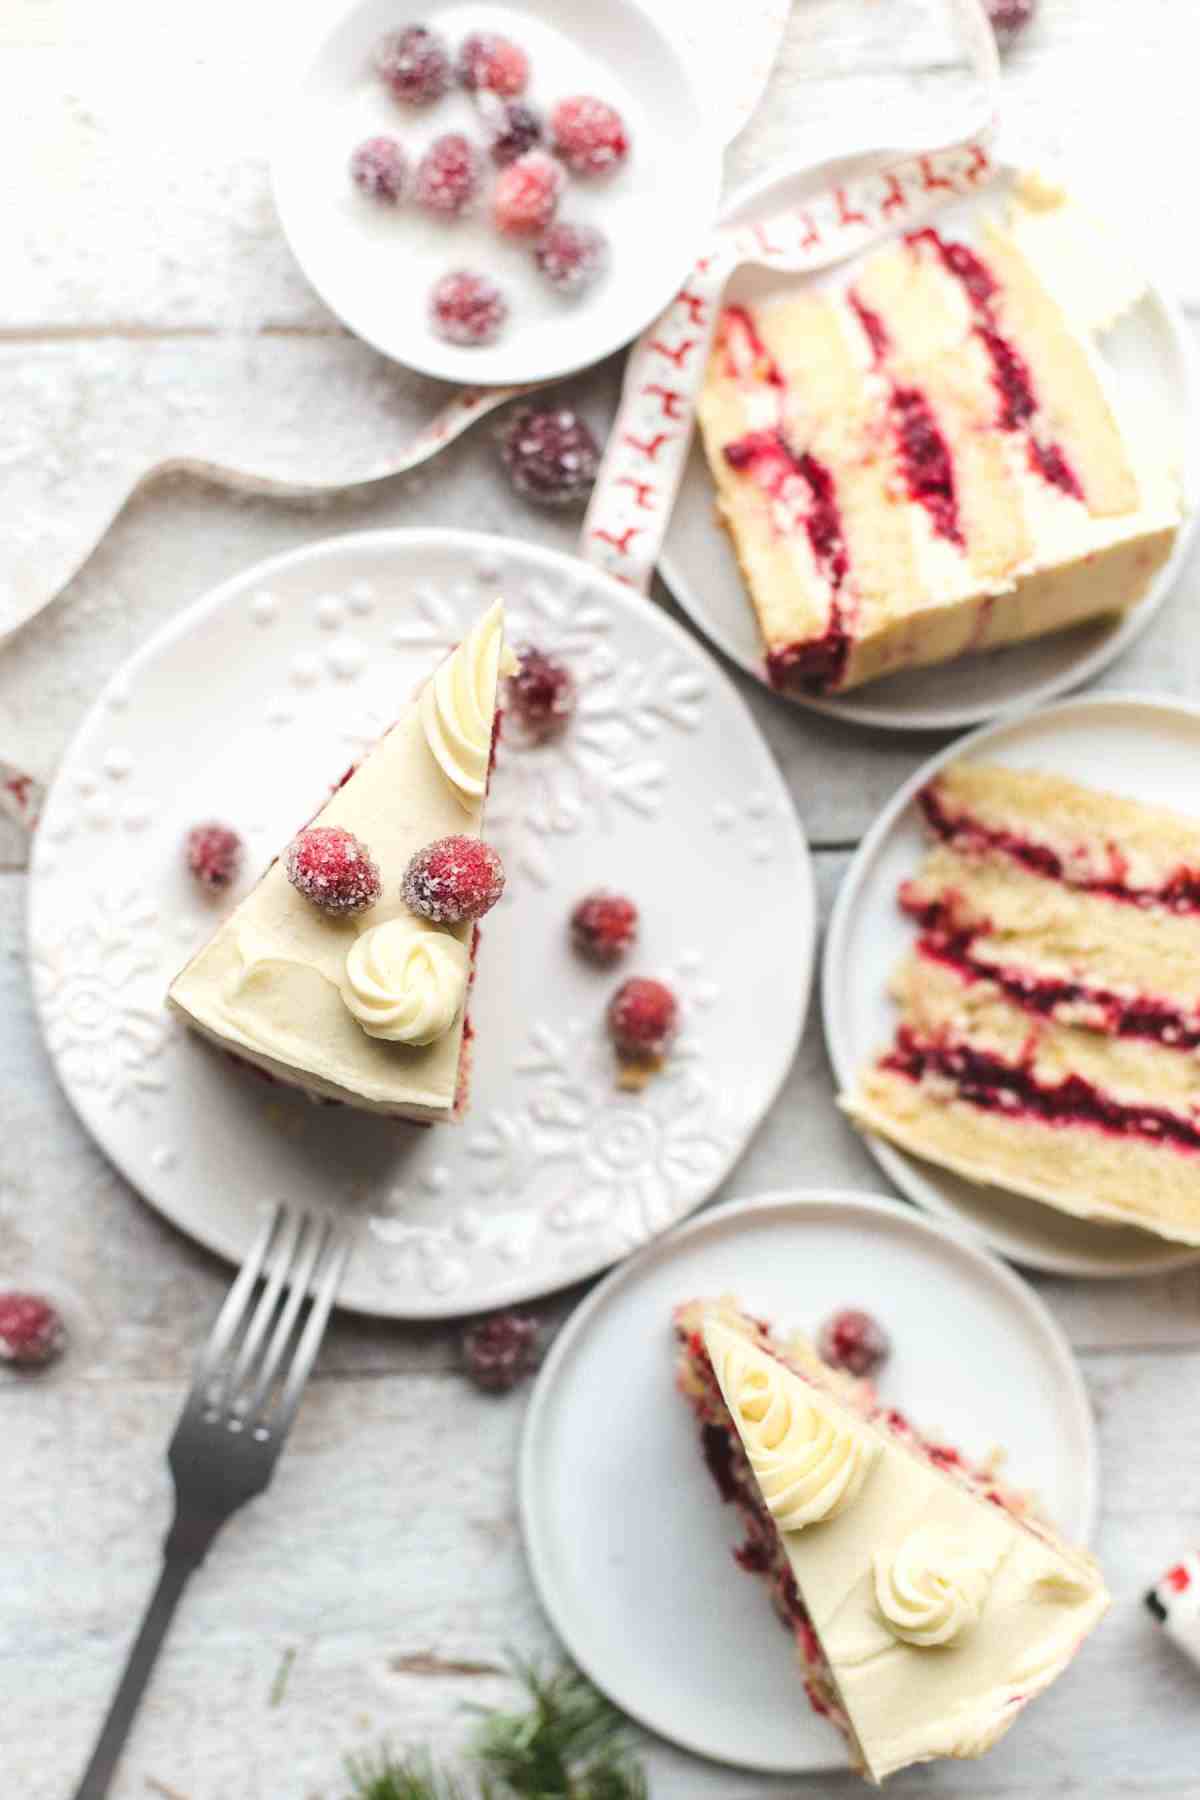 slices of orange layer cake filled with cranberries on white dessert plates